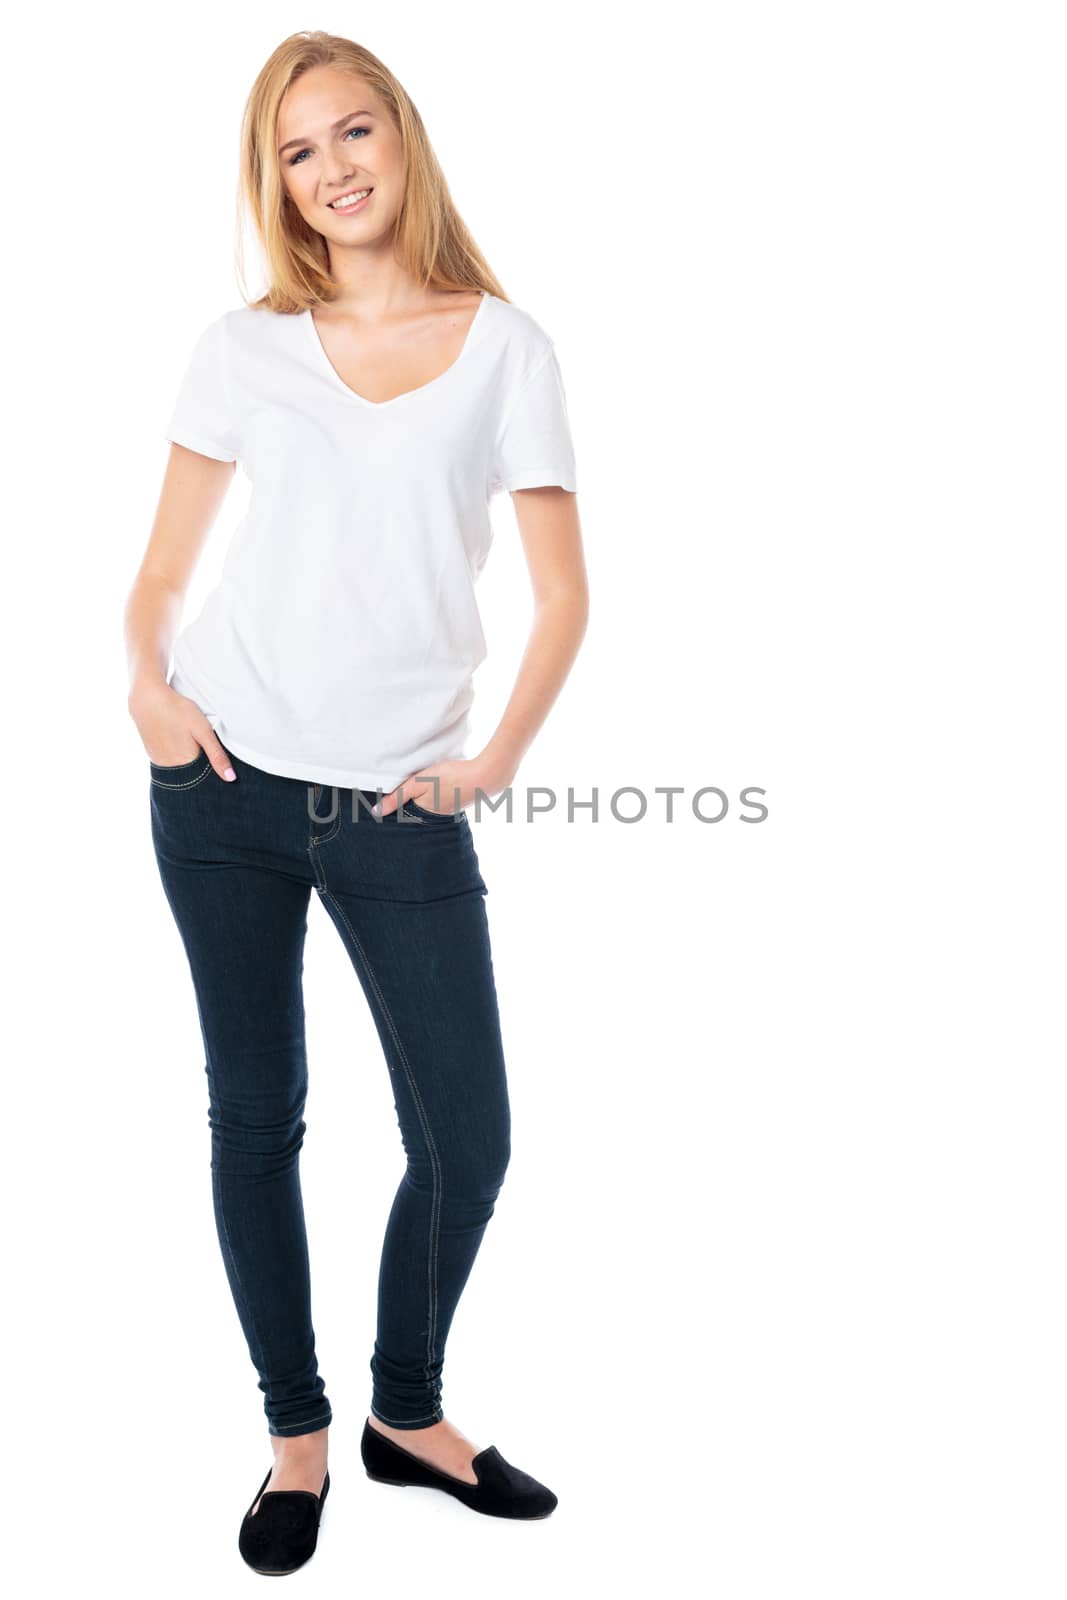 Attractive smiling woman with long blond hair in jeans standing with her hands in her pockets looking at the camera, isolated on white